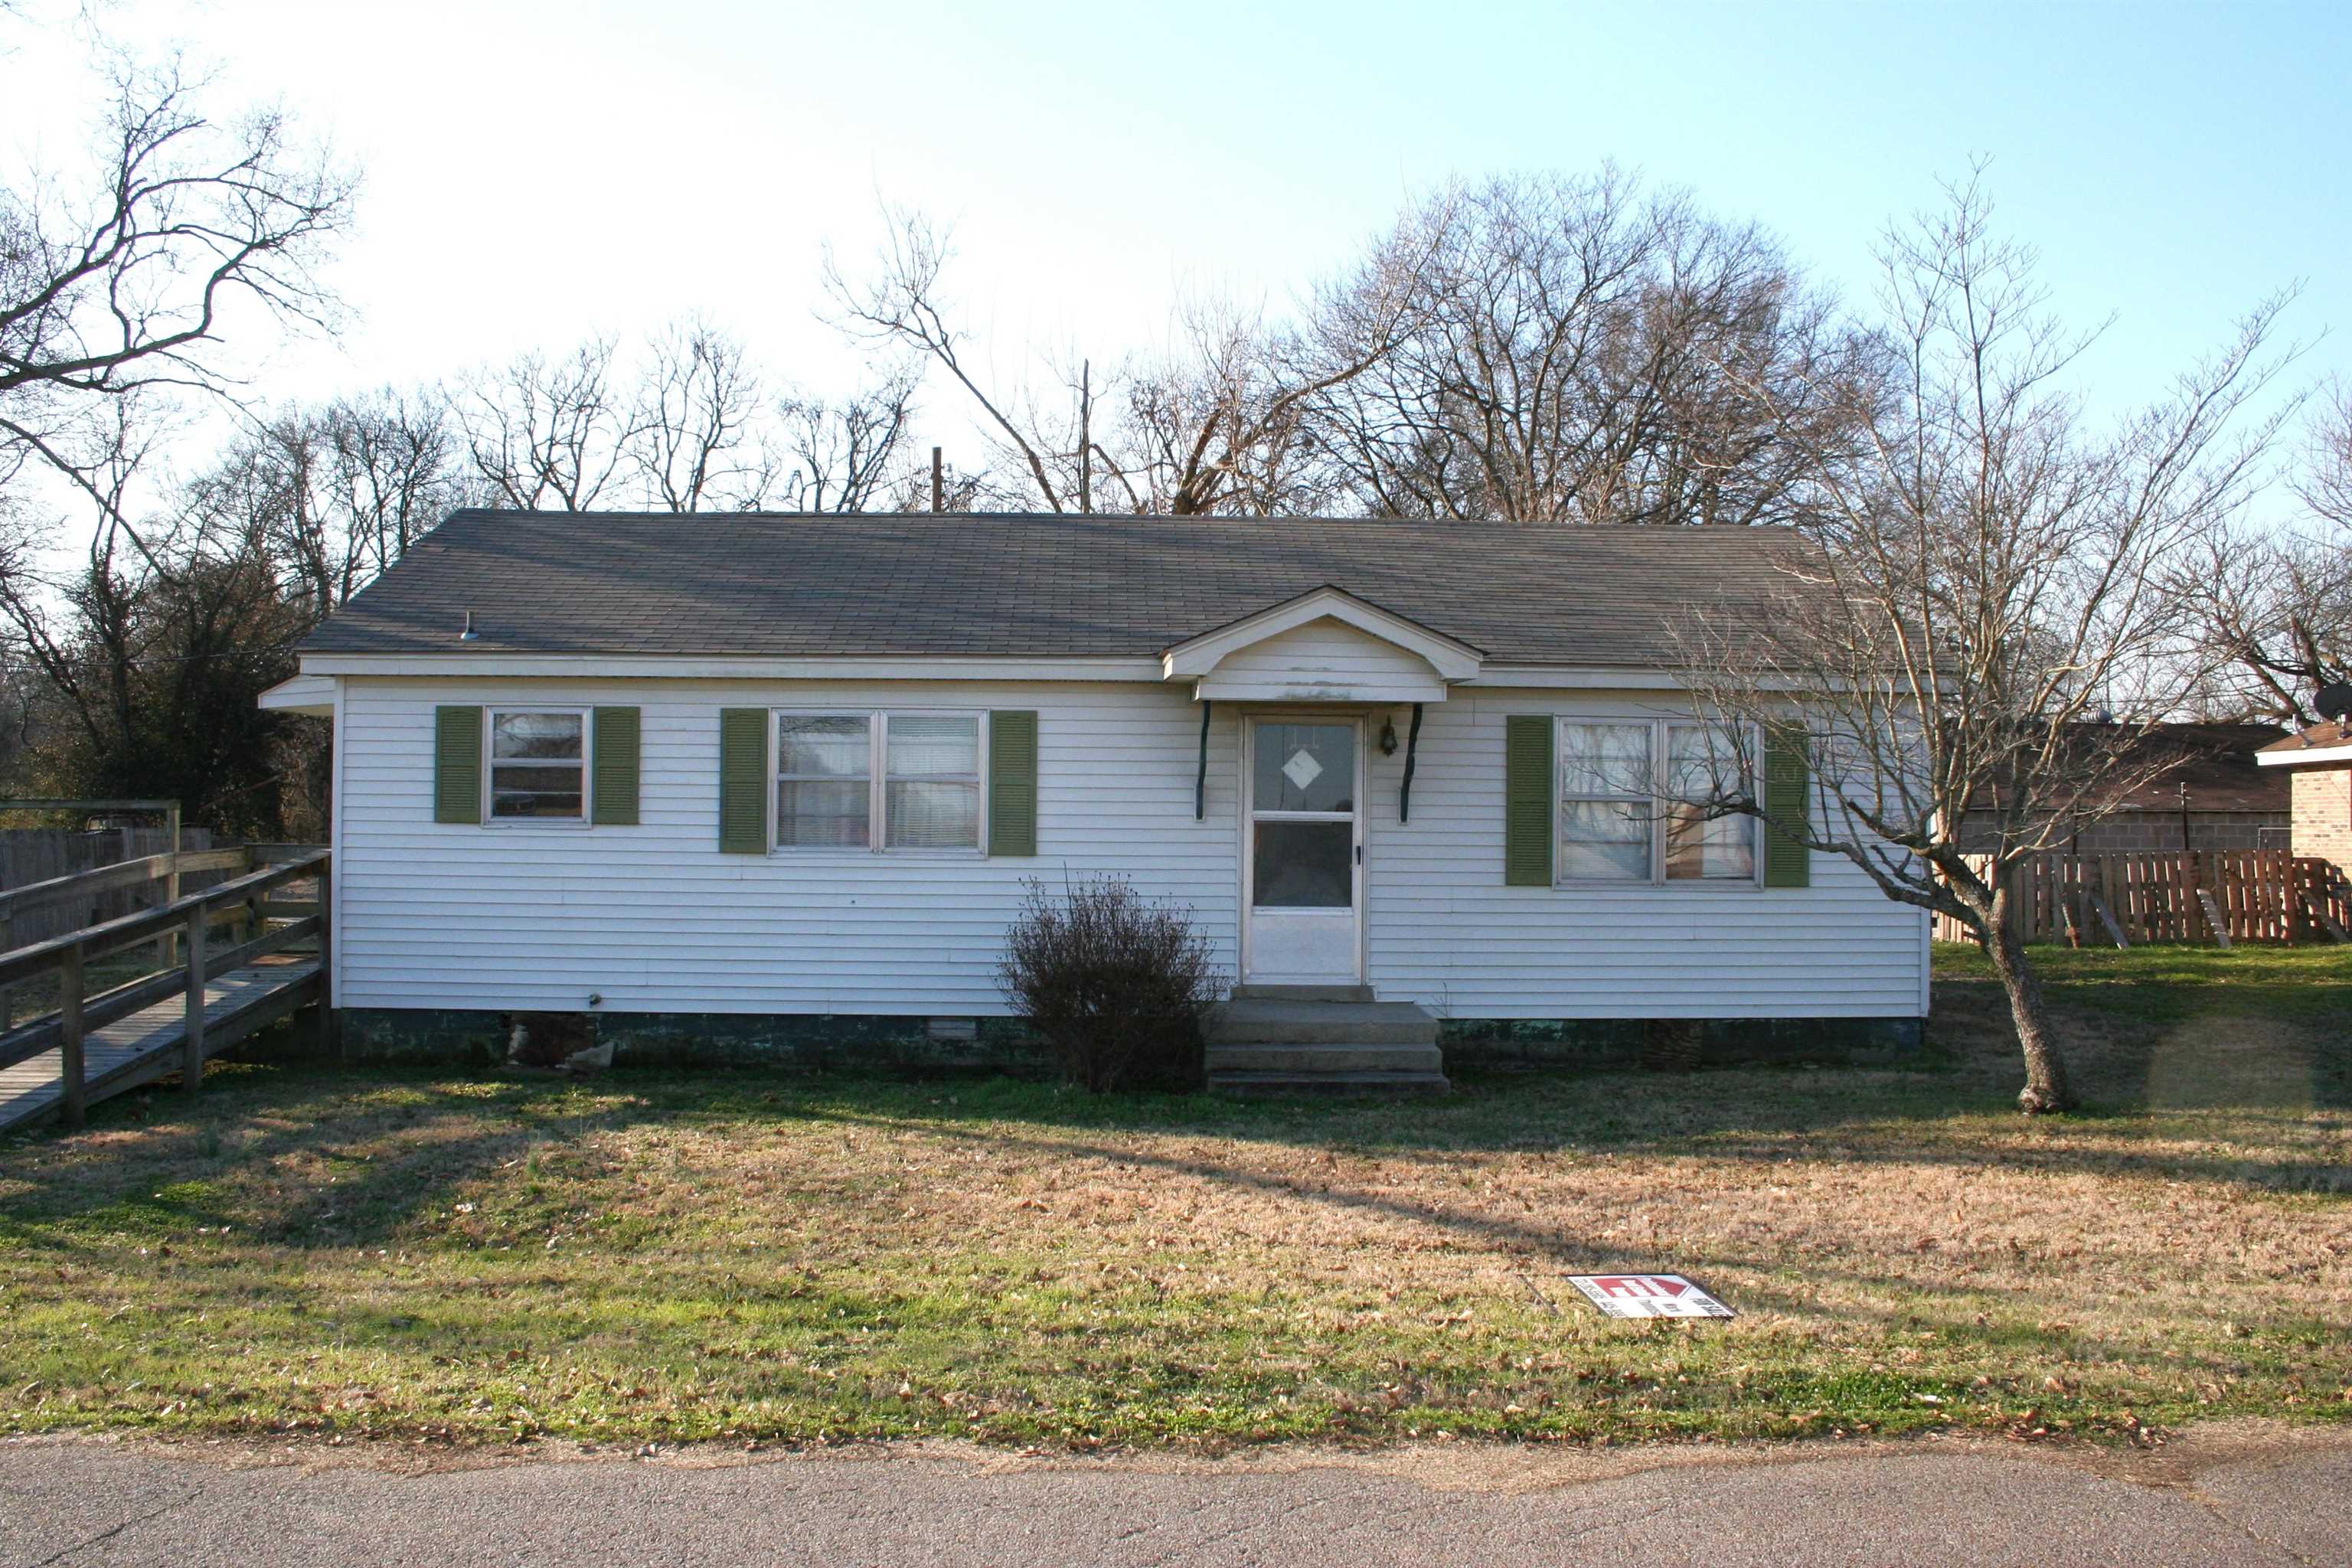 Nice 3 bedroom 1 bath vinyl sided home. This home has lots of potential and with a little sprucing up will be a very nice home at a low cost and low taxes. It has a large back yard for entertaining or a great garden spot. Call Mark Thompson to view this home! 731-445-9997